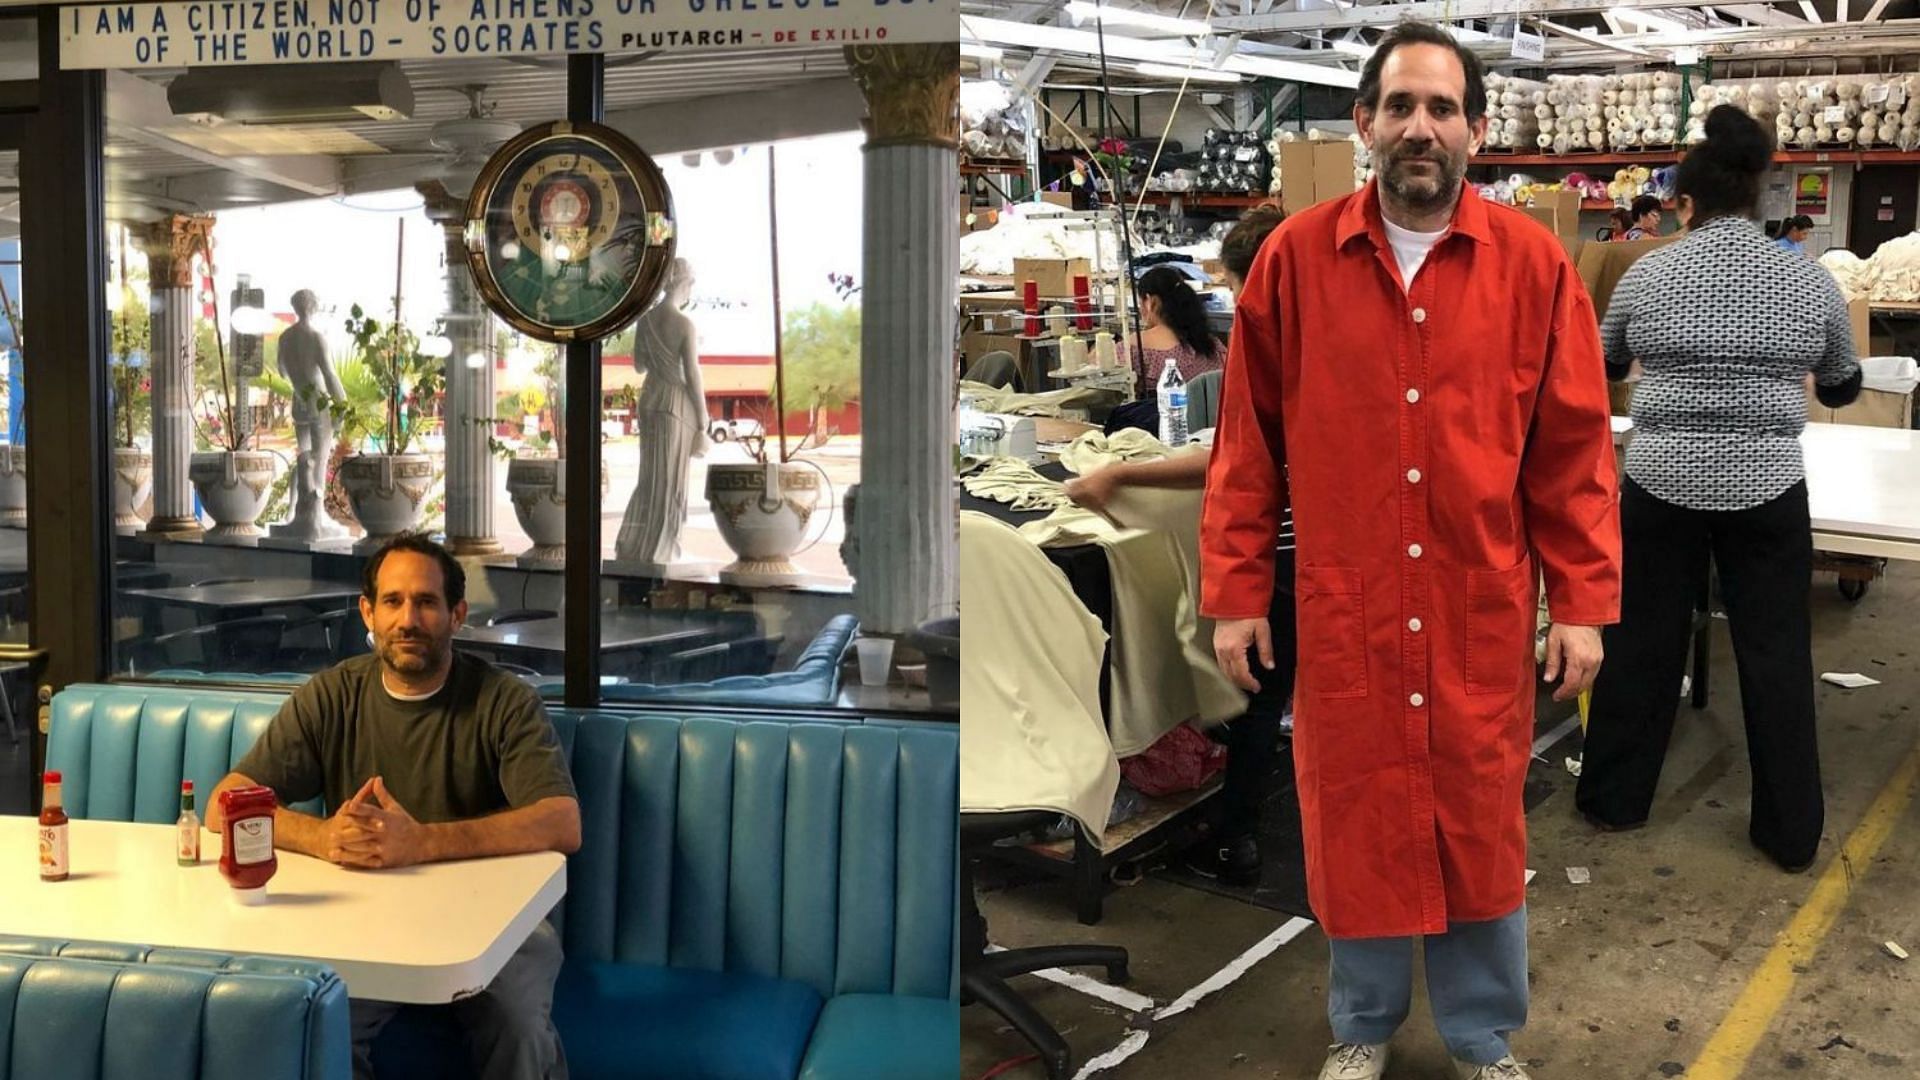 Dov Charney filed for personal bankruptcy in Los Angeles (Image via Dov Charney Los Angeles)